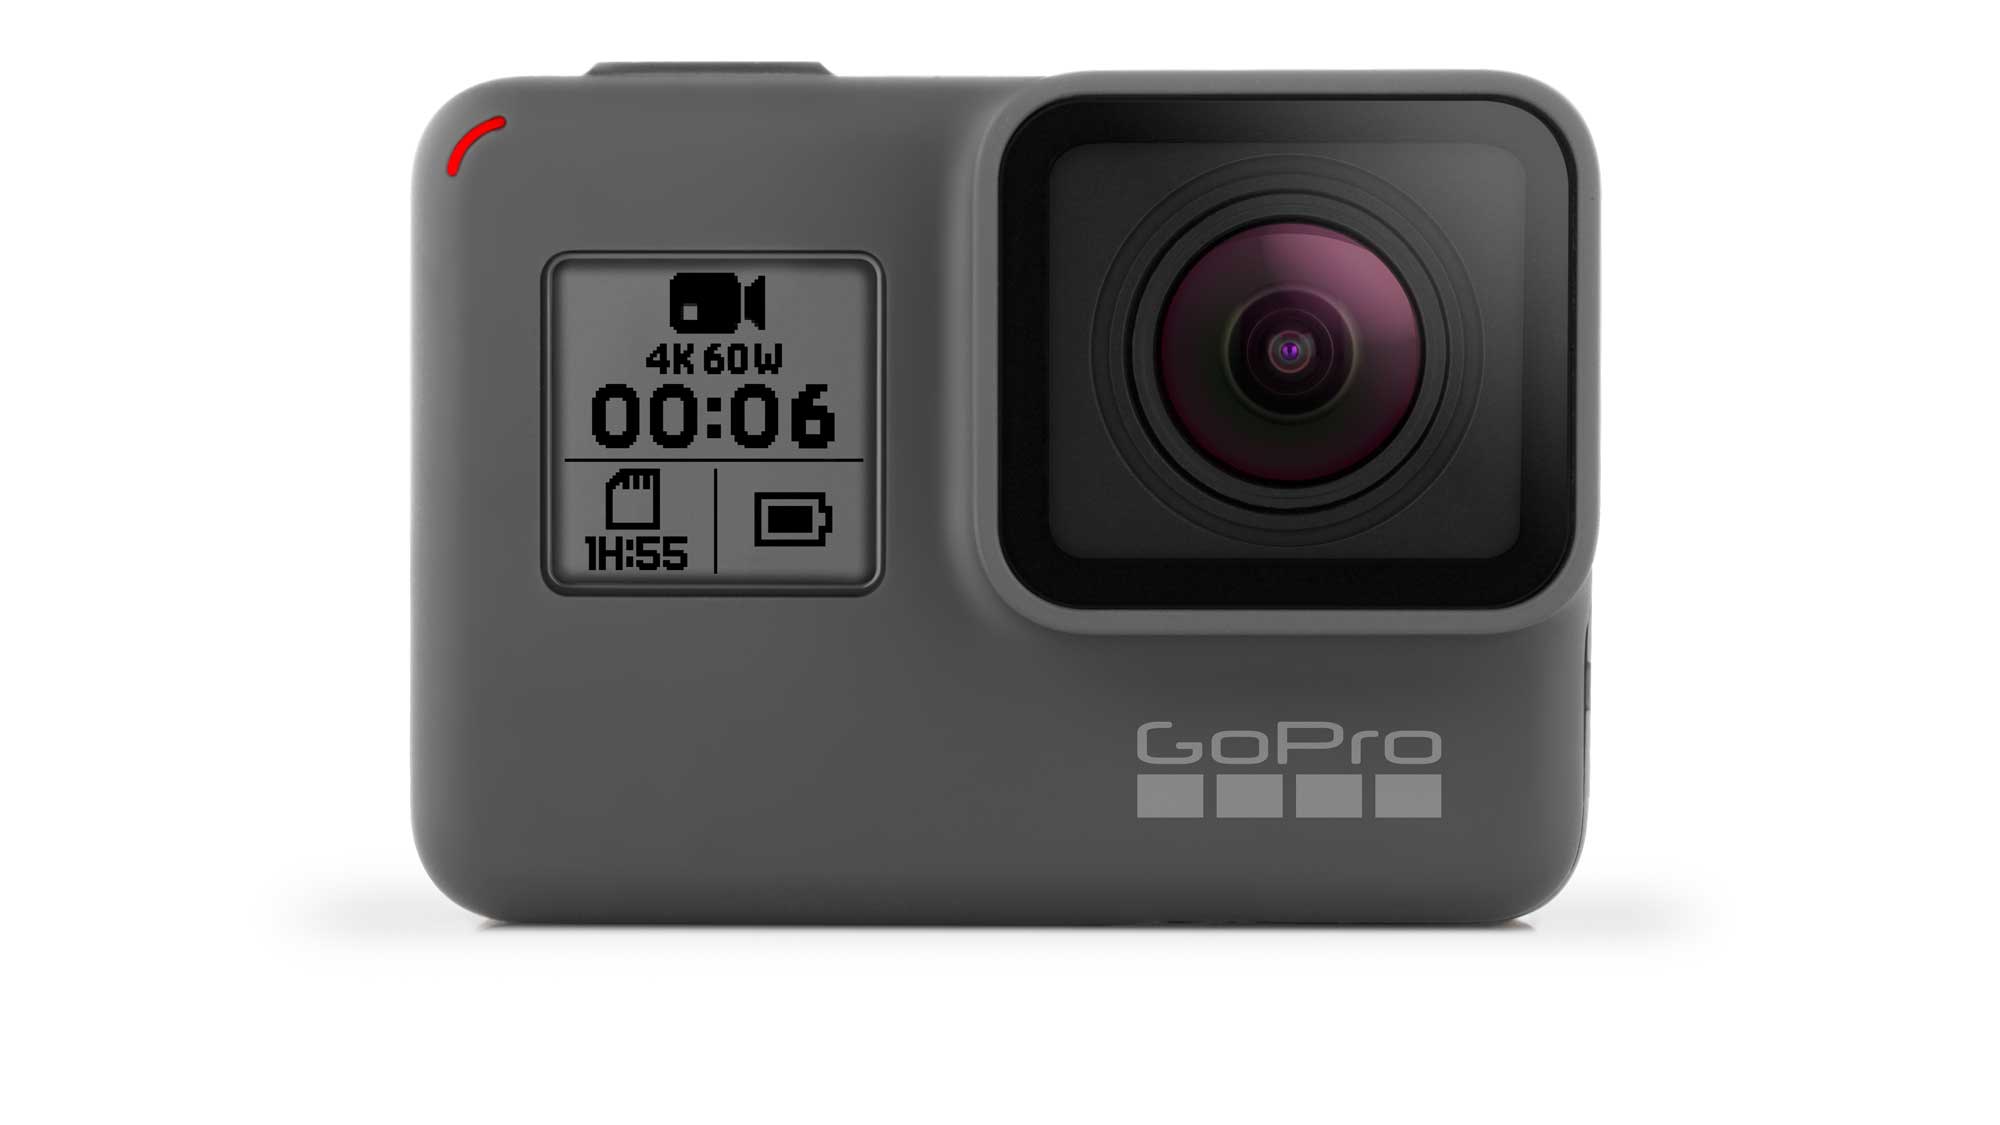 New GoPros! First Look At The GoPro Hero 6 Black and...